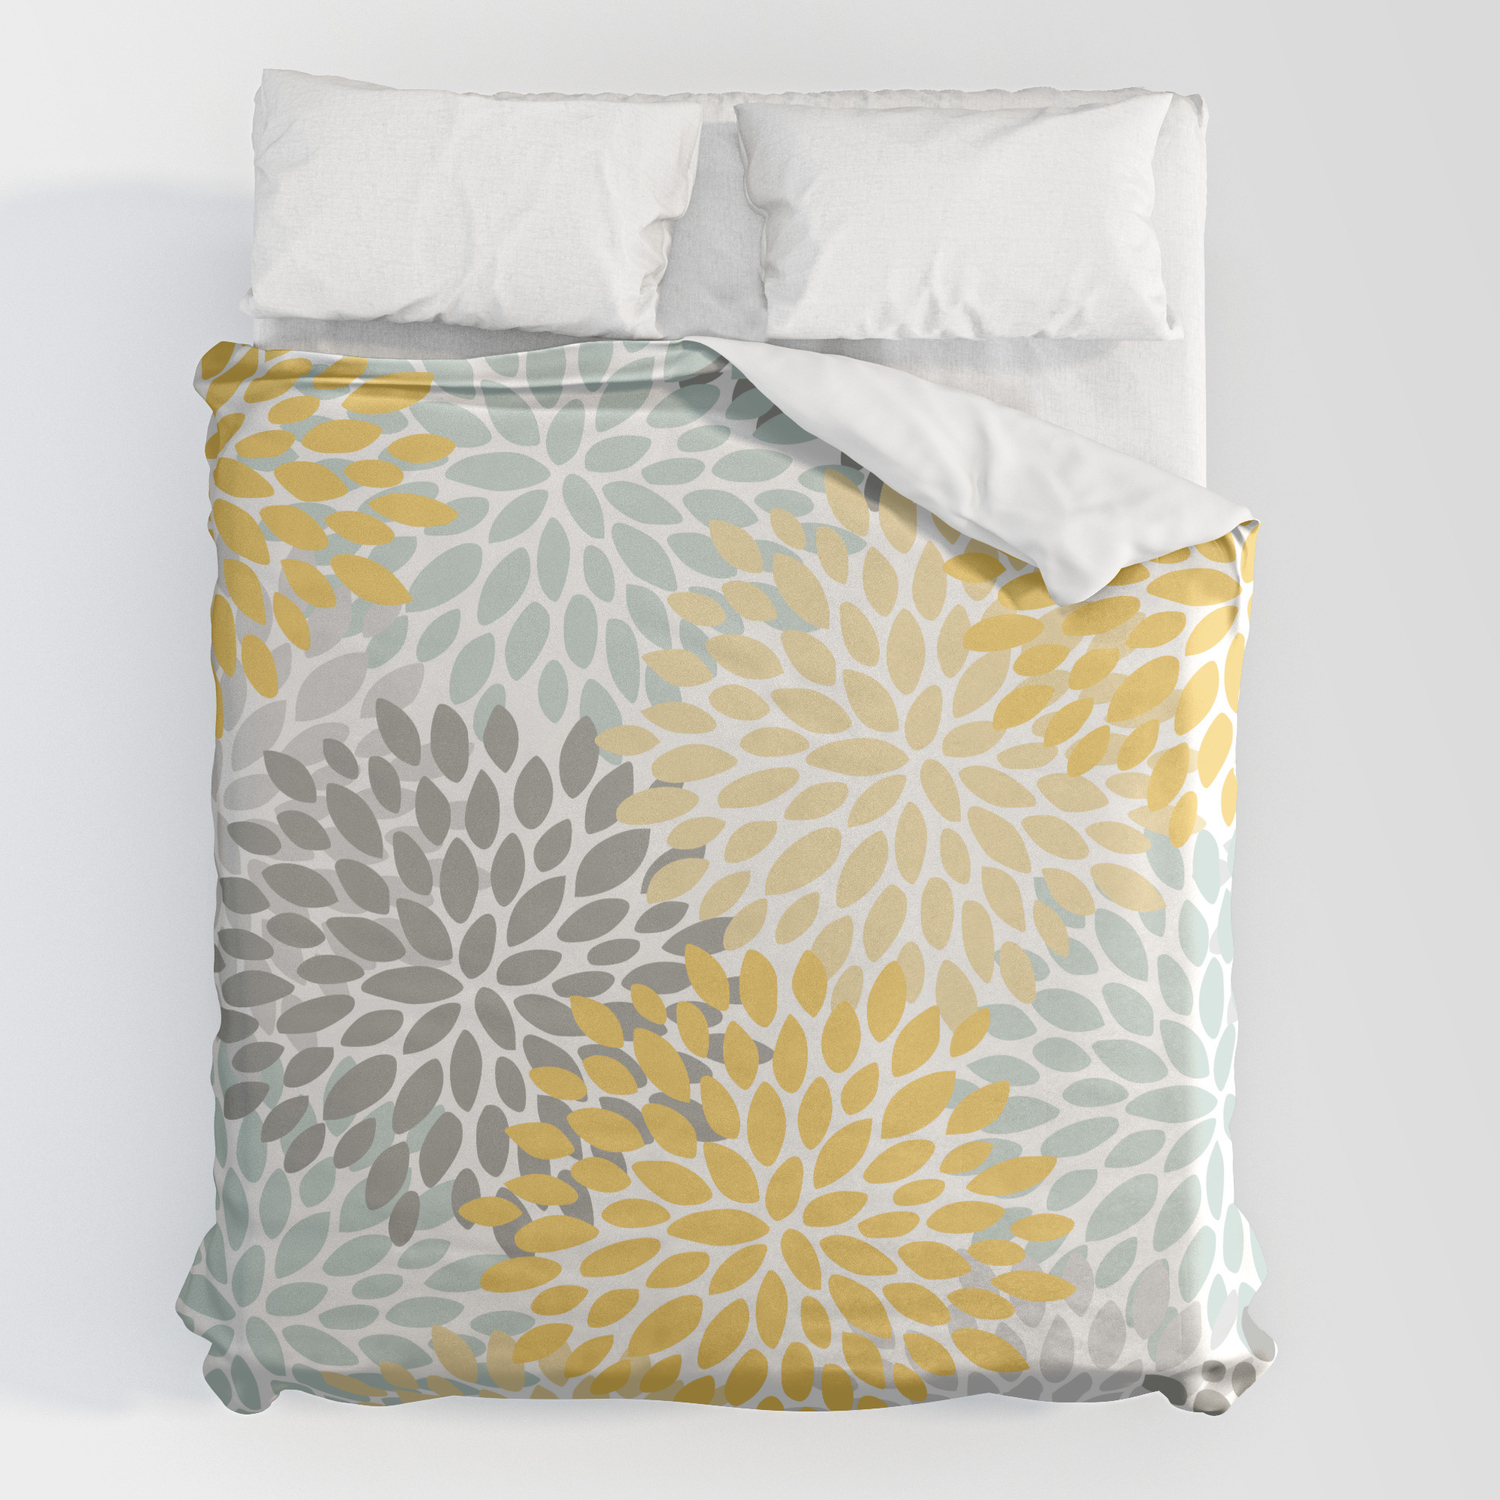 Yellow Pale Aqua And Gray Duvet Cover, Yellow And Gray Duvet Cover King